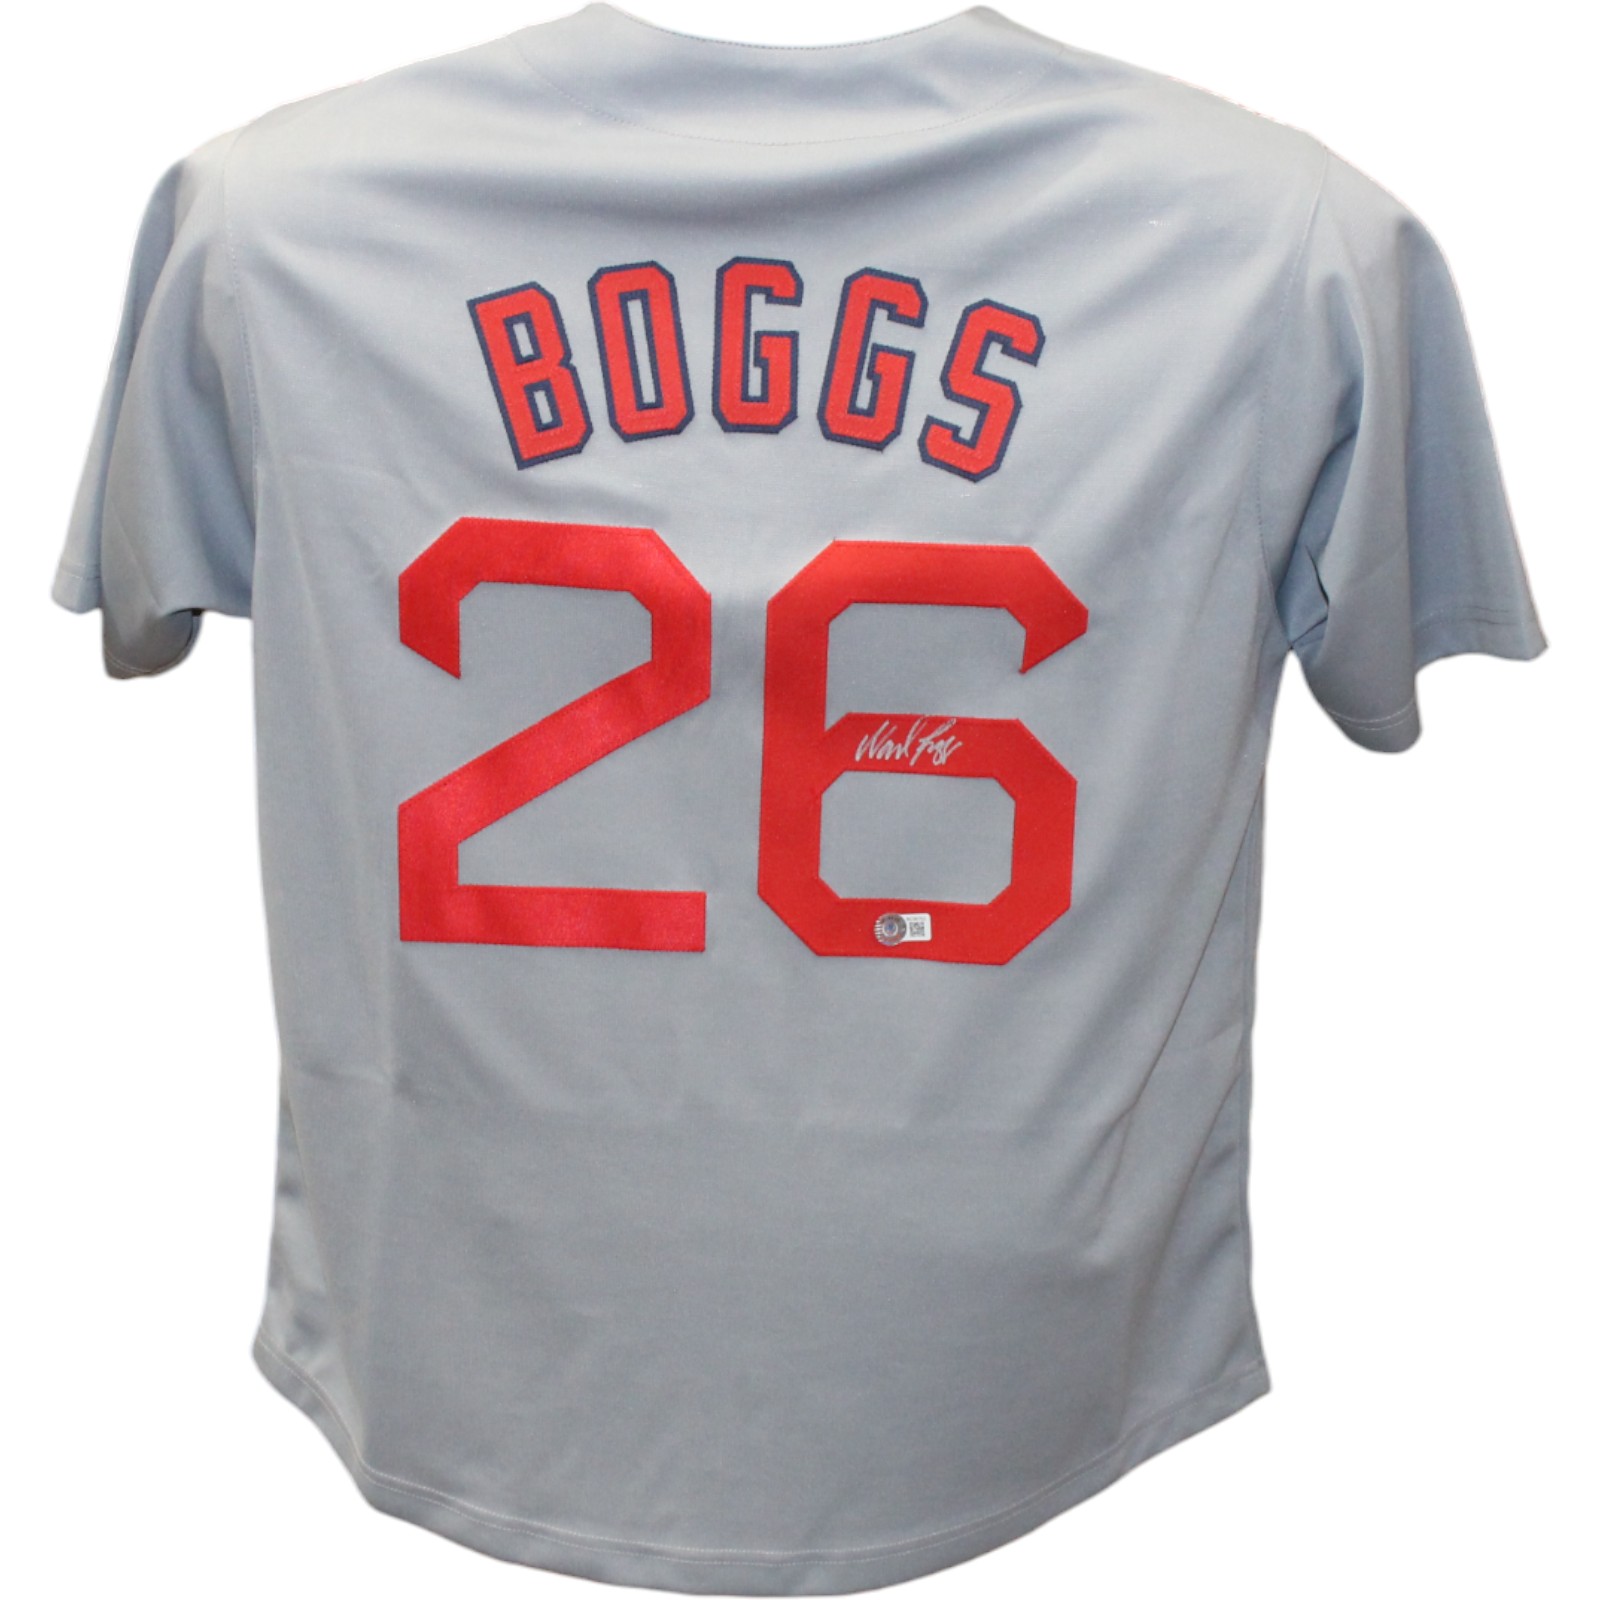 Wade Boggs Autographed/Signed Pro Syle Grey Jersey Beckett